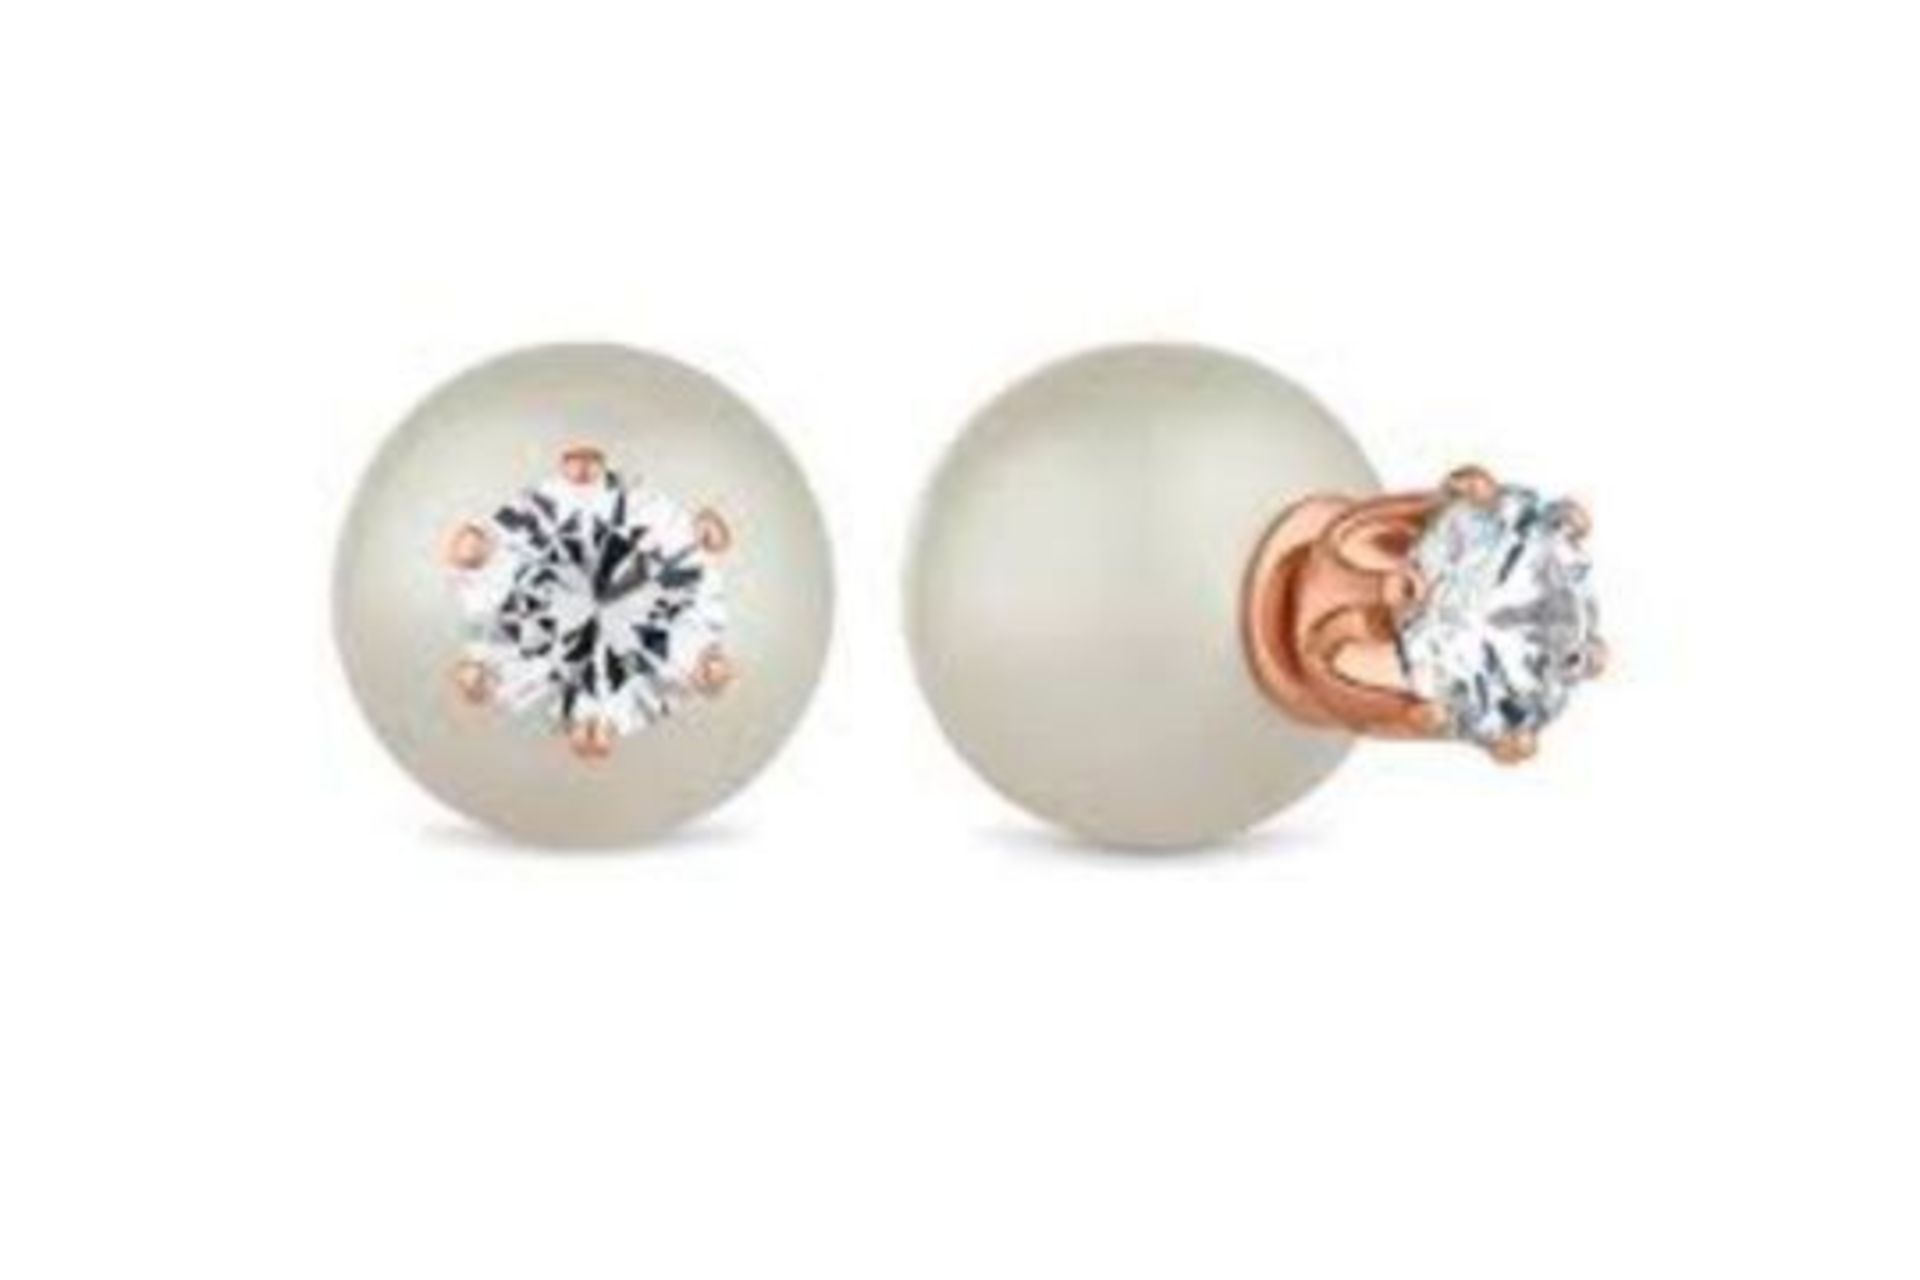 6 X BRAND NEW DIAMONDSTYLE LONDON PEARL 2 IN 1 STUDS WITH CERTIFICATION FO AUTHENTICITY RRP £85 EACH - Image 2 of 2